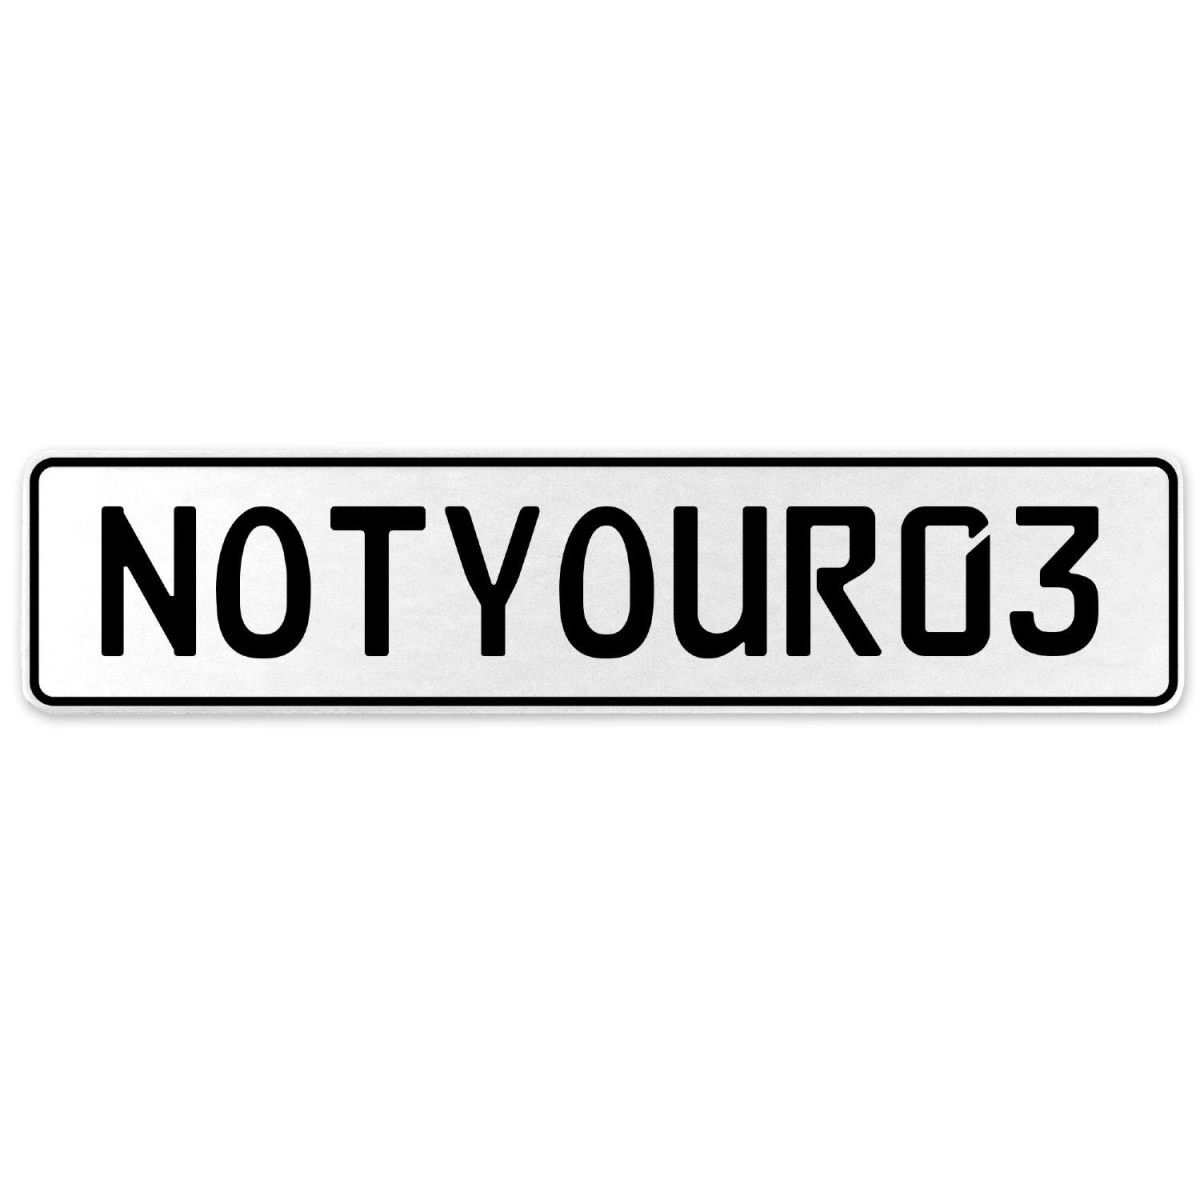 Notyour03 - White Aluminum Street Sign Mancave Euro Plate Name Door Sign Wall